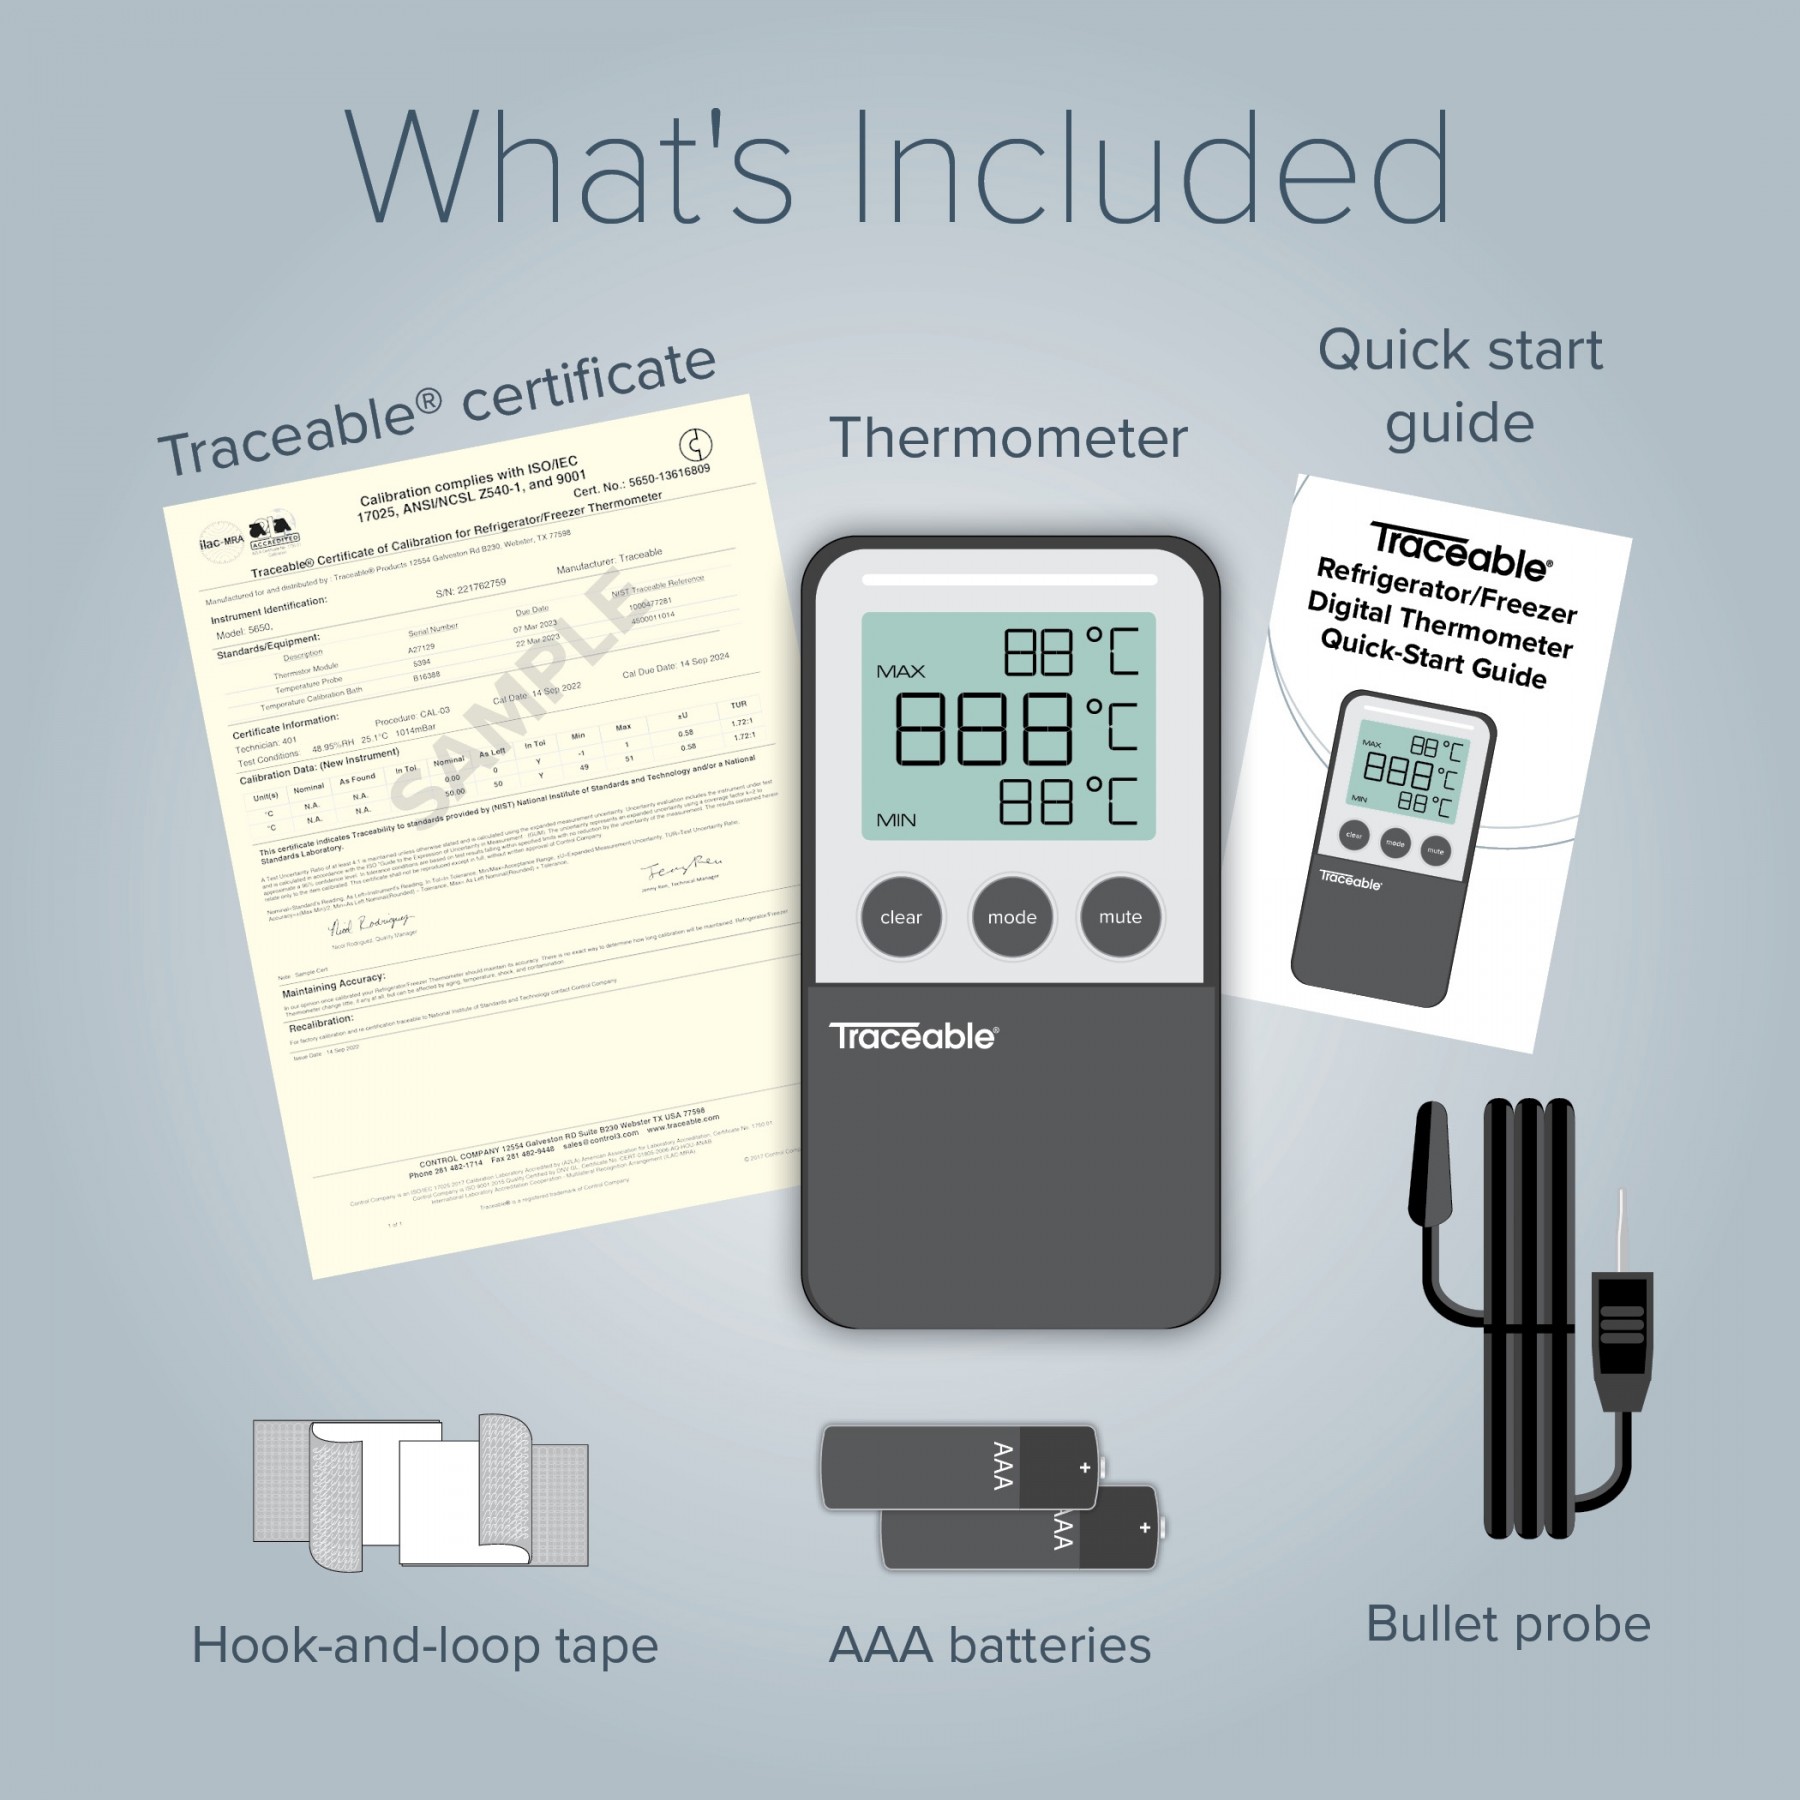 Traceable® Thermometers for Refrigerator and Freezer Environments